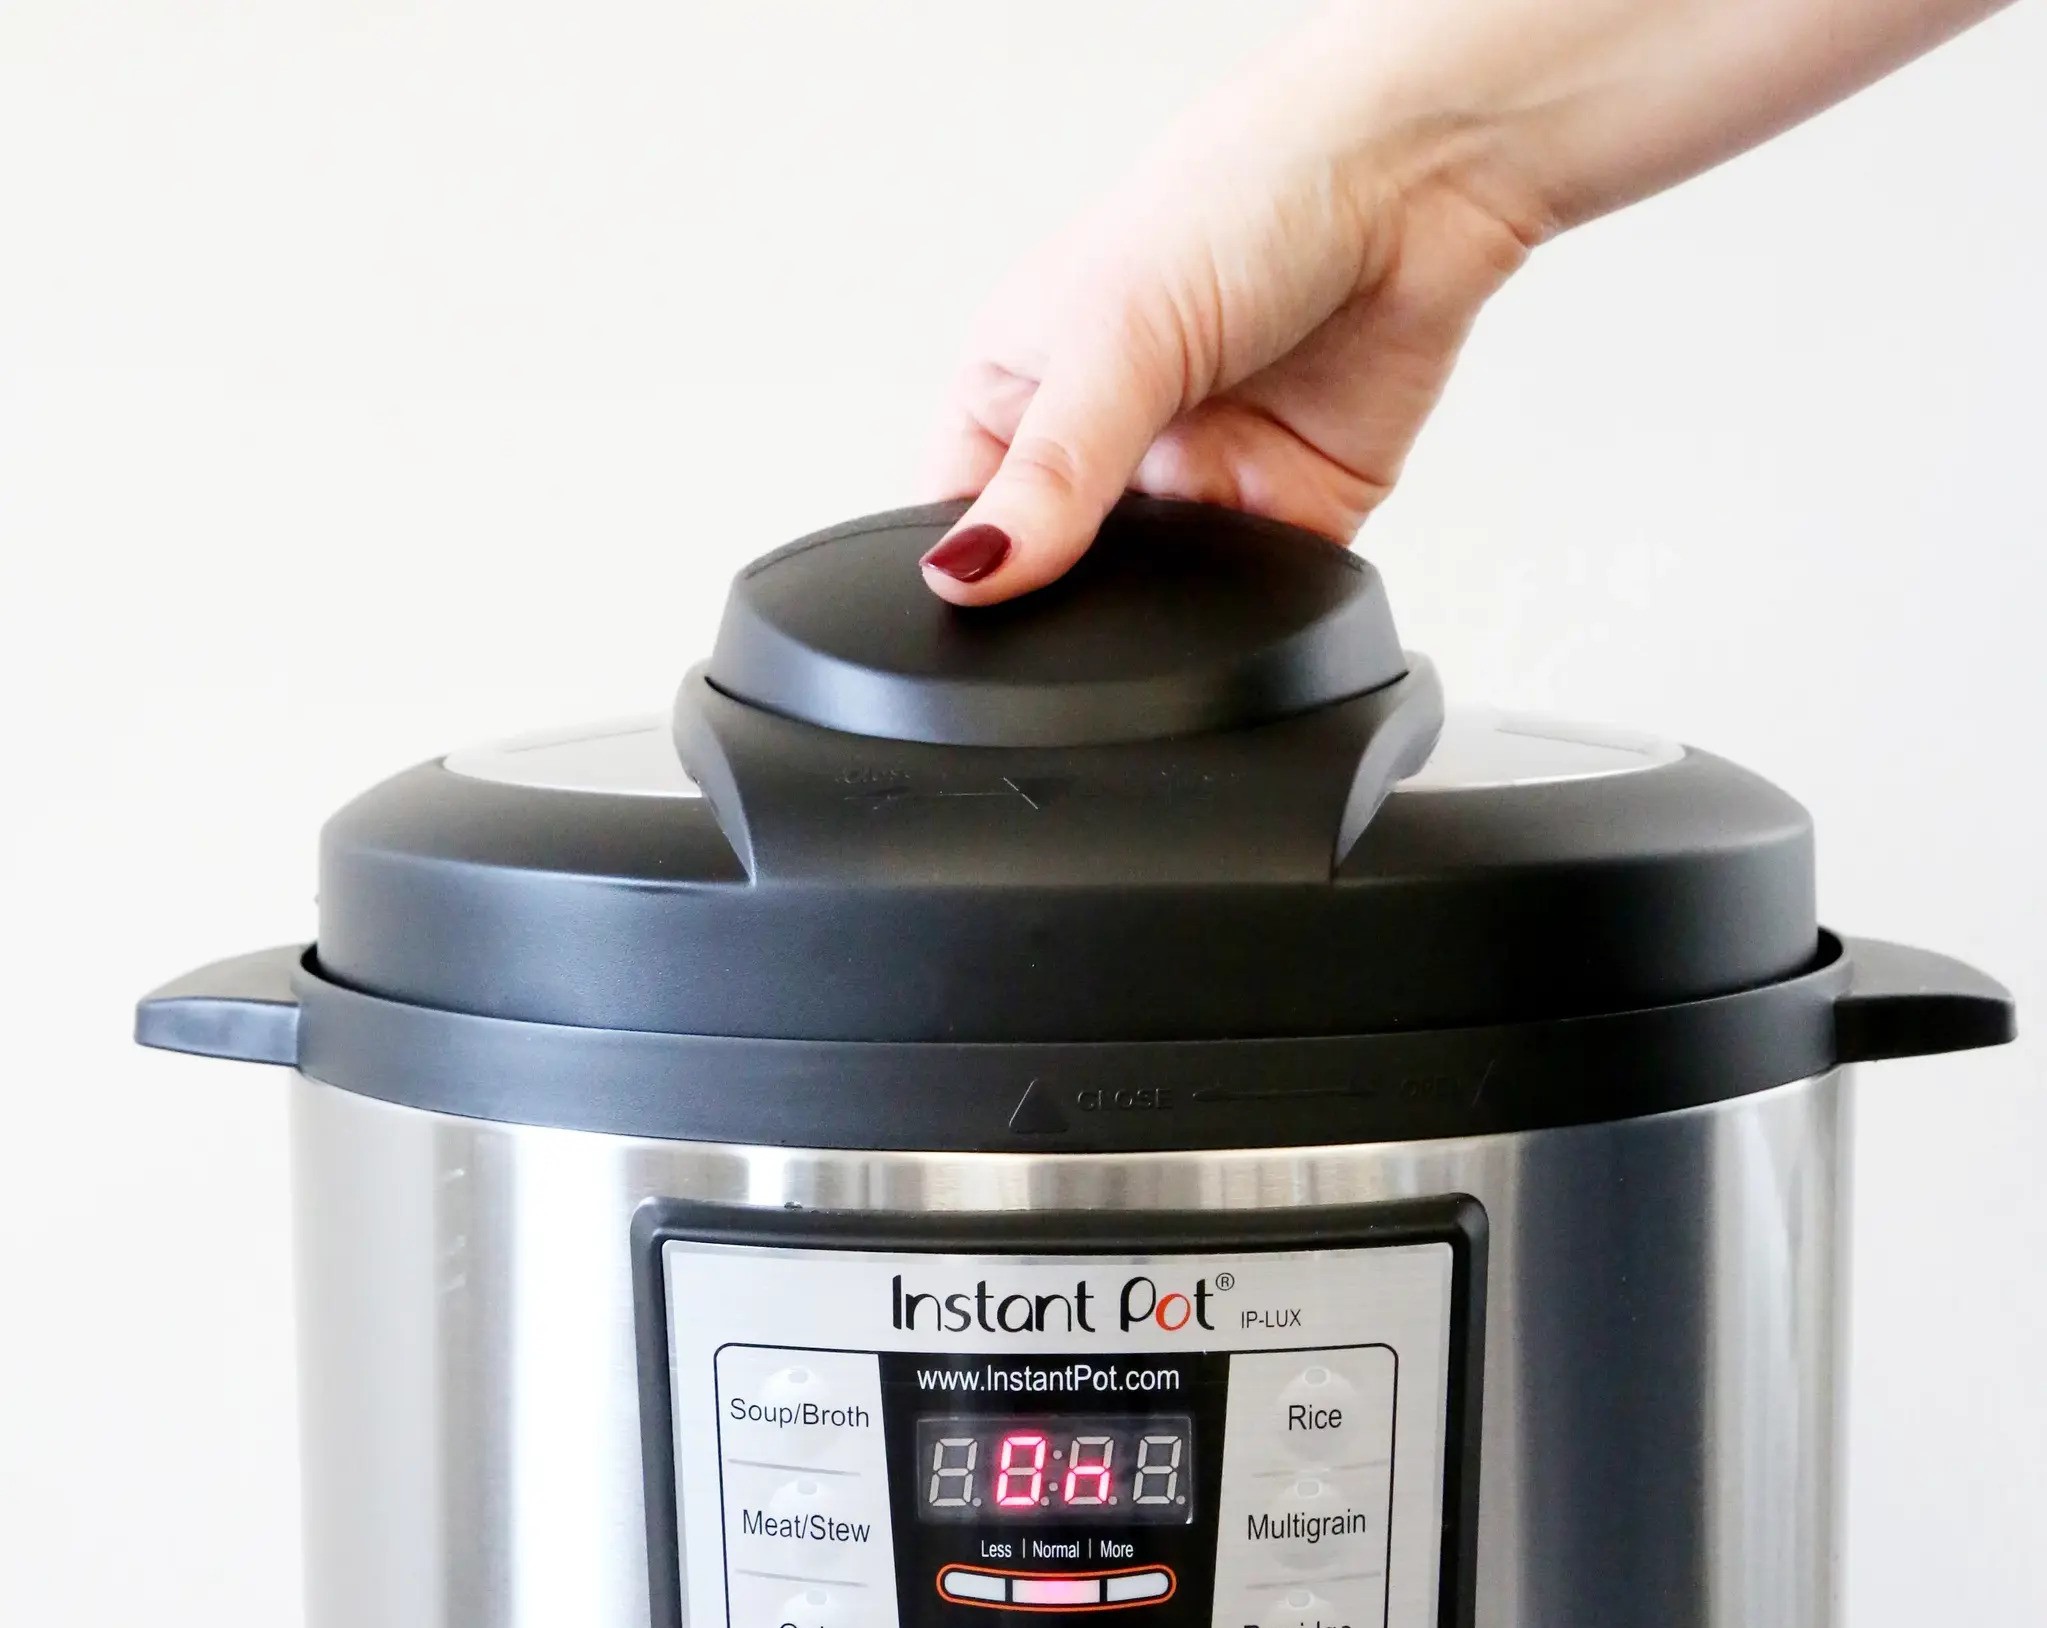 Do You Close The Vent When Slow Cooking With An Electric Pressure Cooker